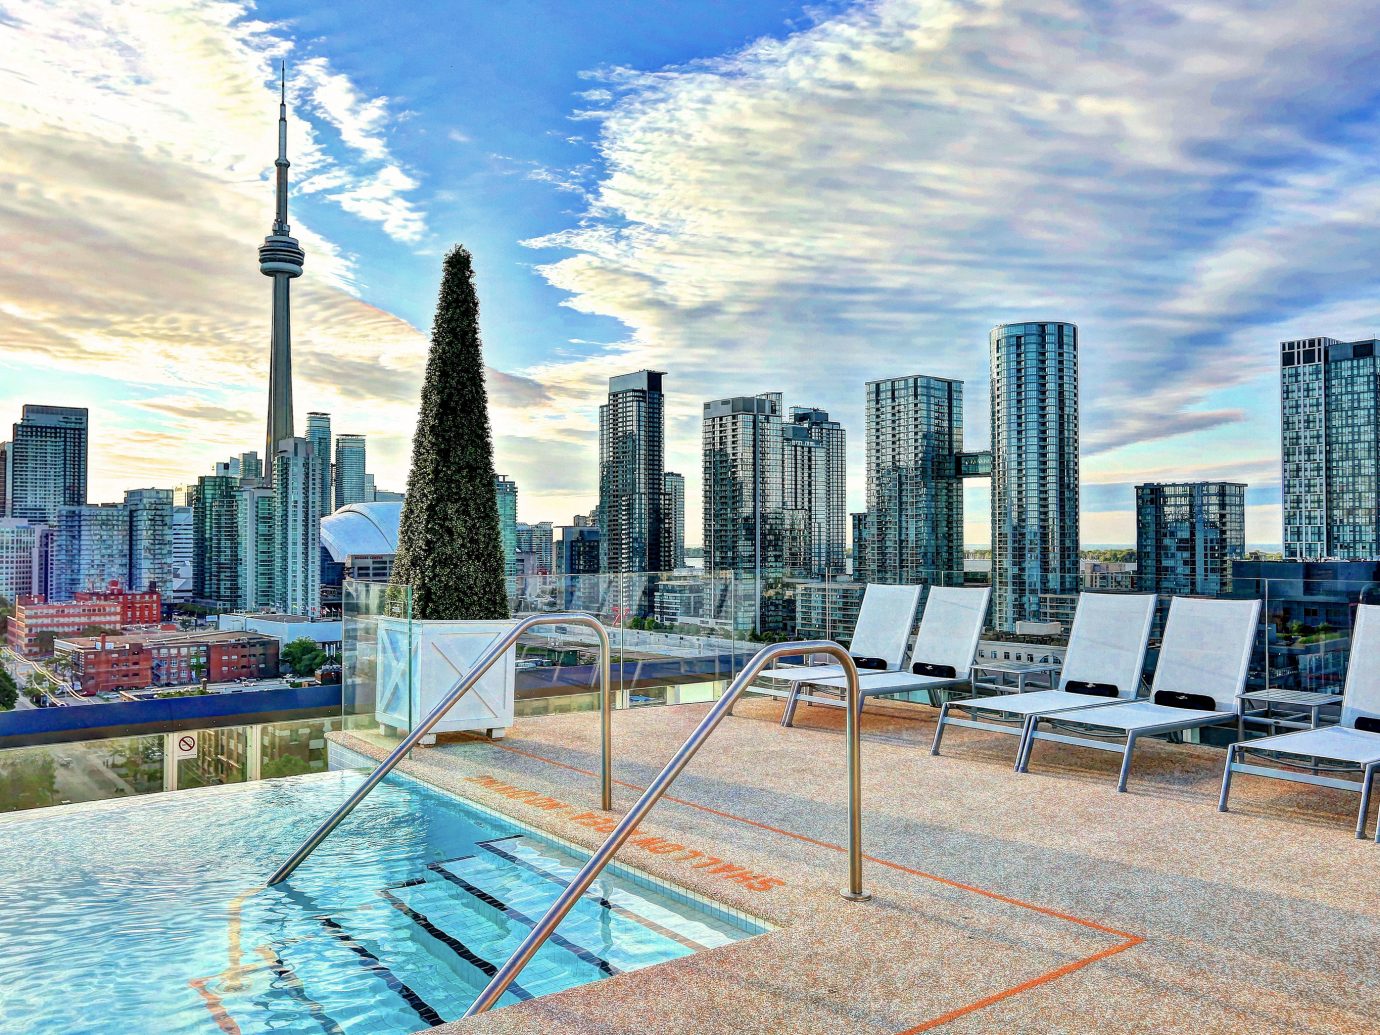 Canada Hotels Toronto sky outdoor condominium leisure property City skyline human settlement plaza skyscraper Downtown residential area cityscape tower block real estate estate overlooking day